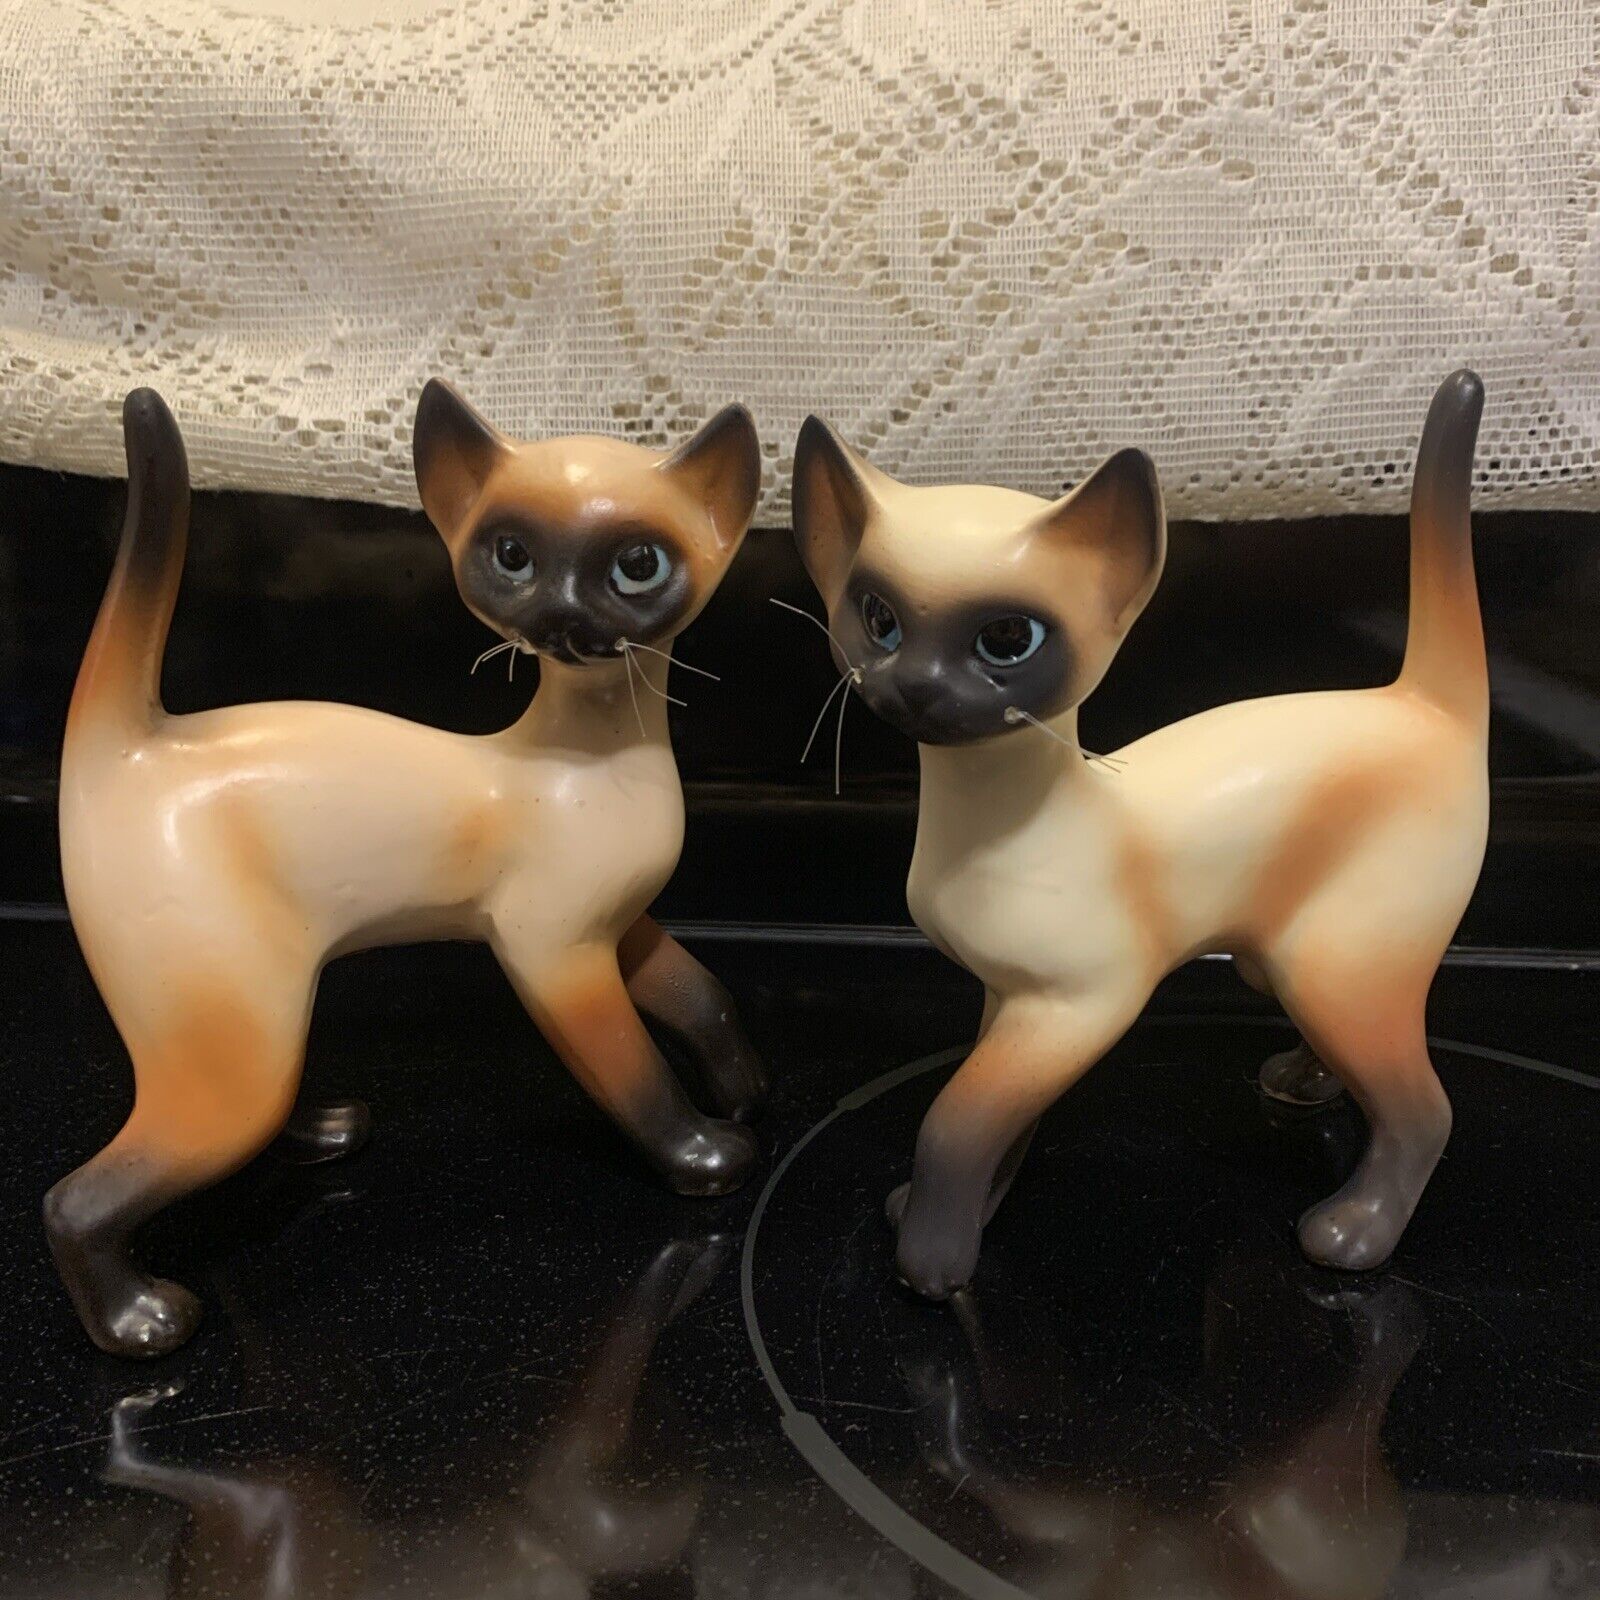 2 Rare Vtg Mint MATCHING Set Of Siamese Cat Ceramic Figurines Japan By Norcrest